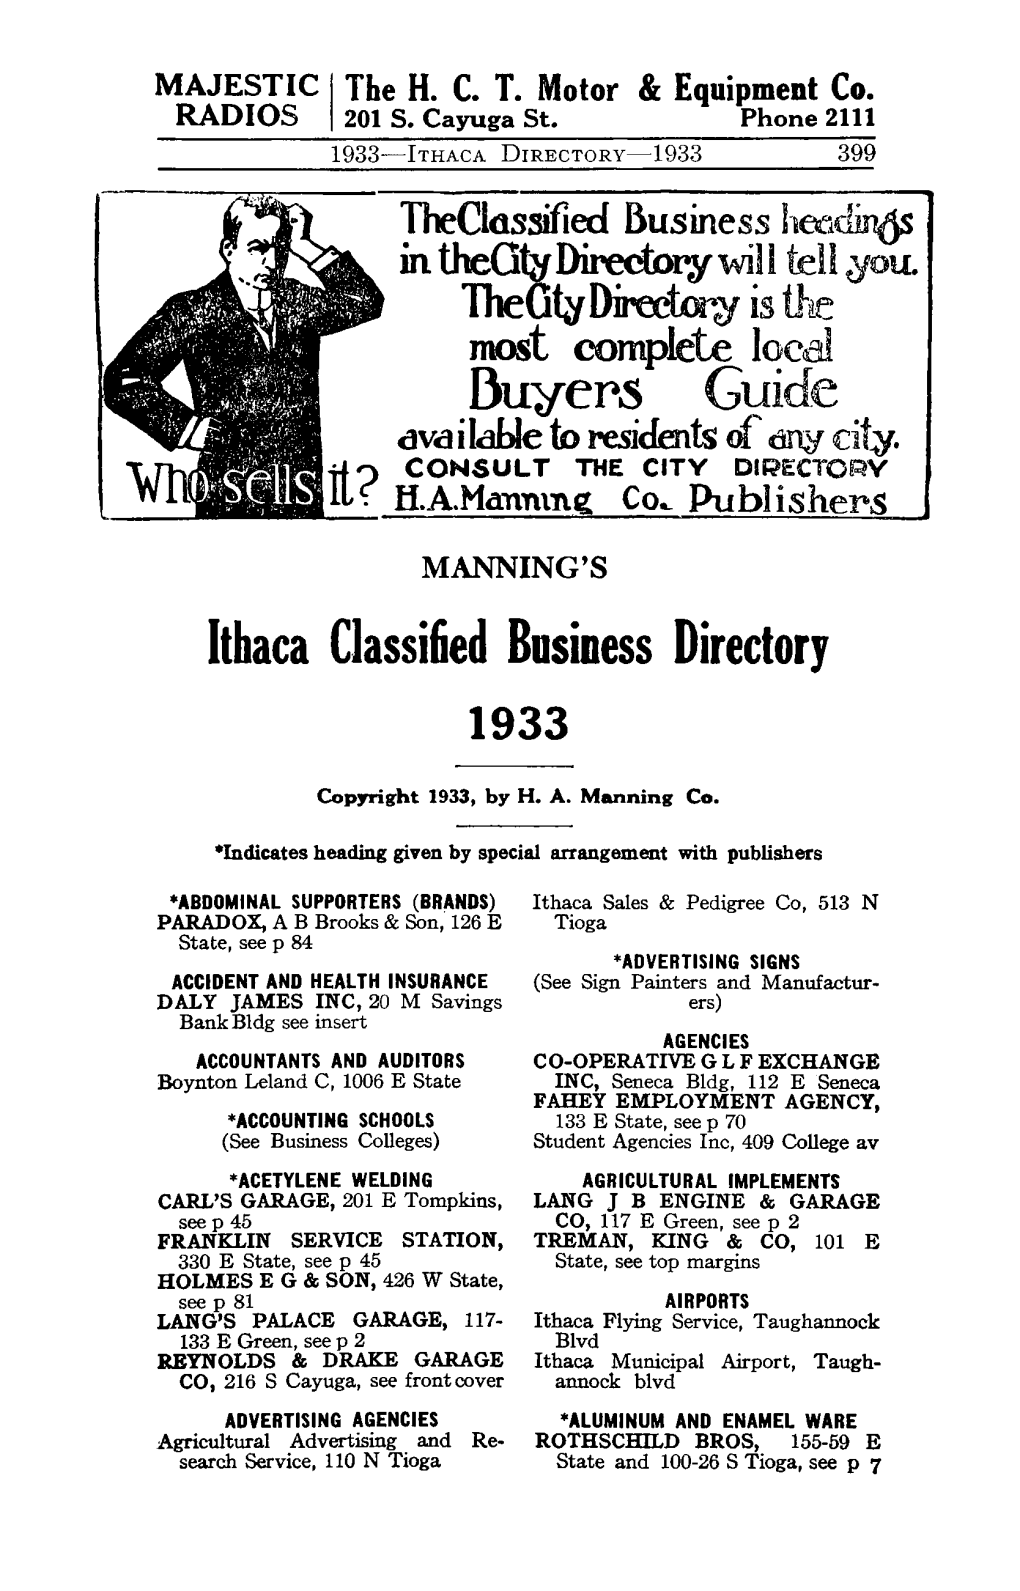 Ithaca Classified Business Directory 1933